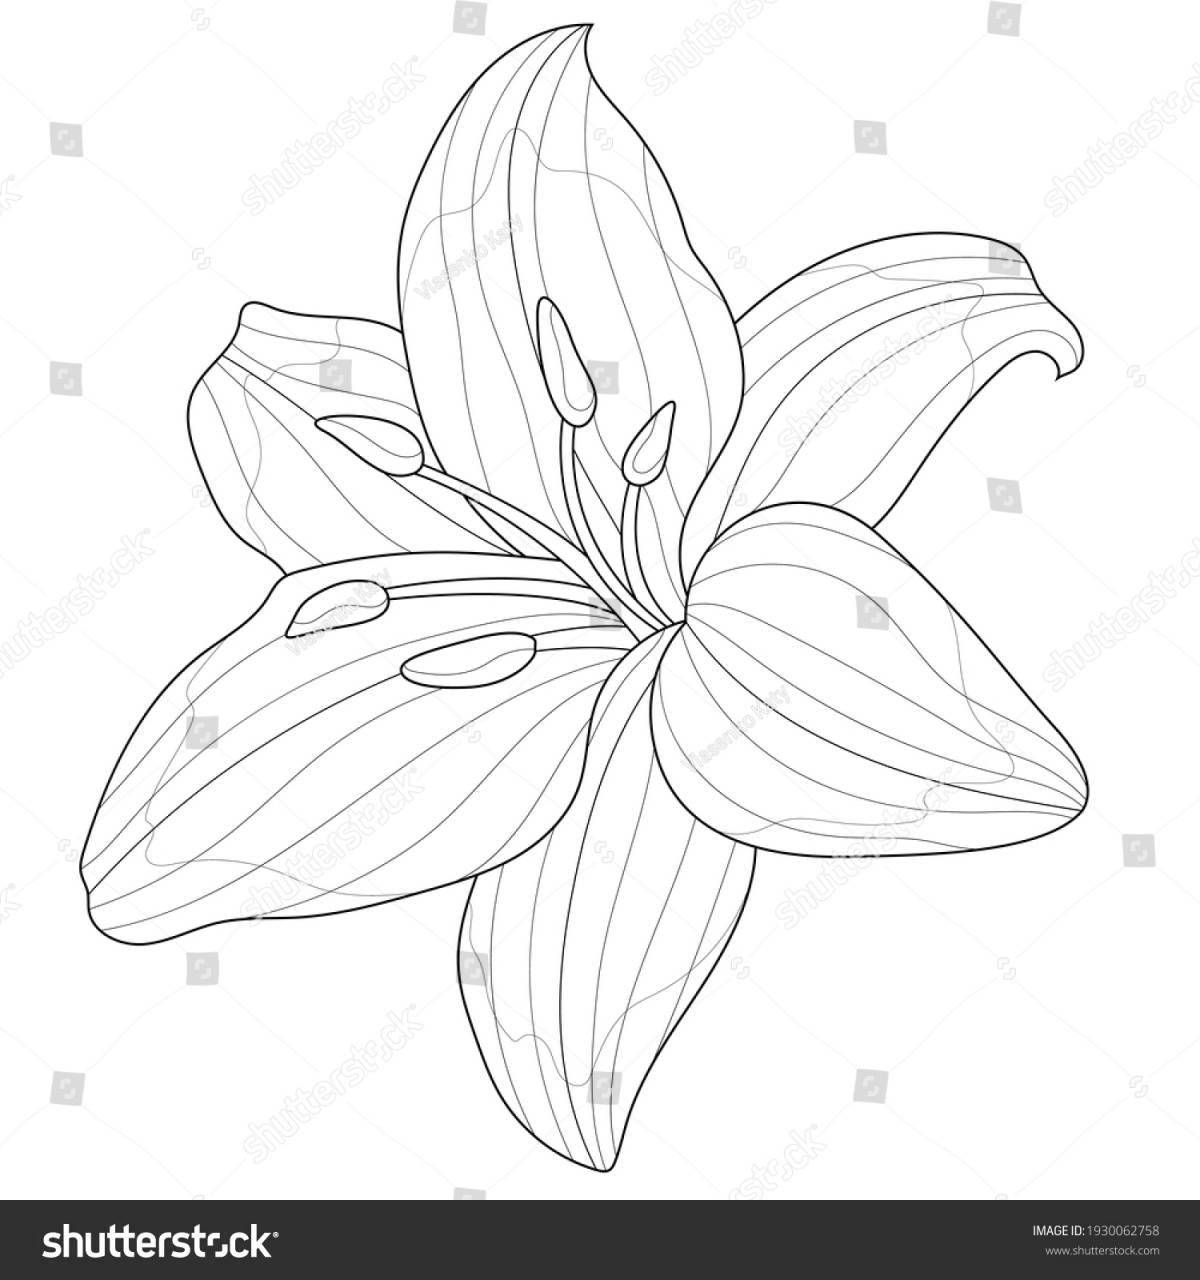 Exquisite sea lily coloring